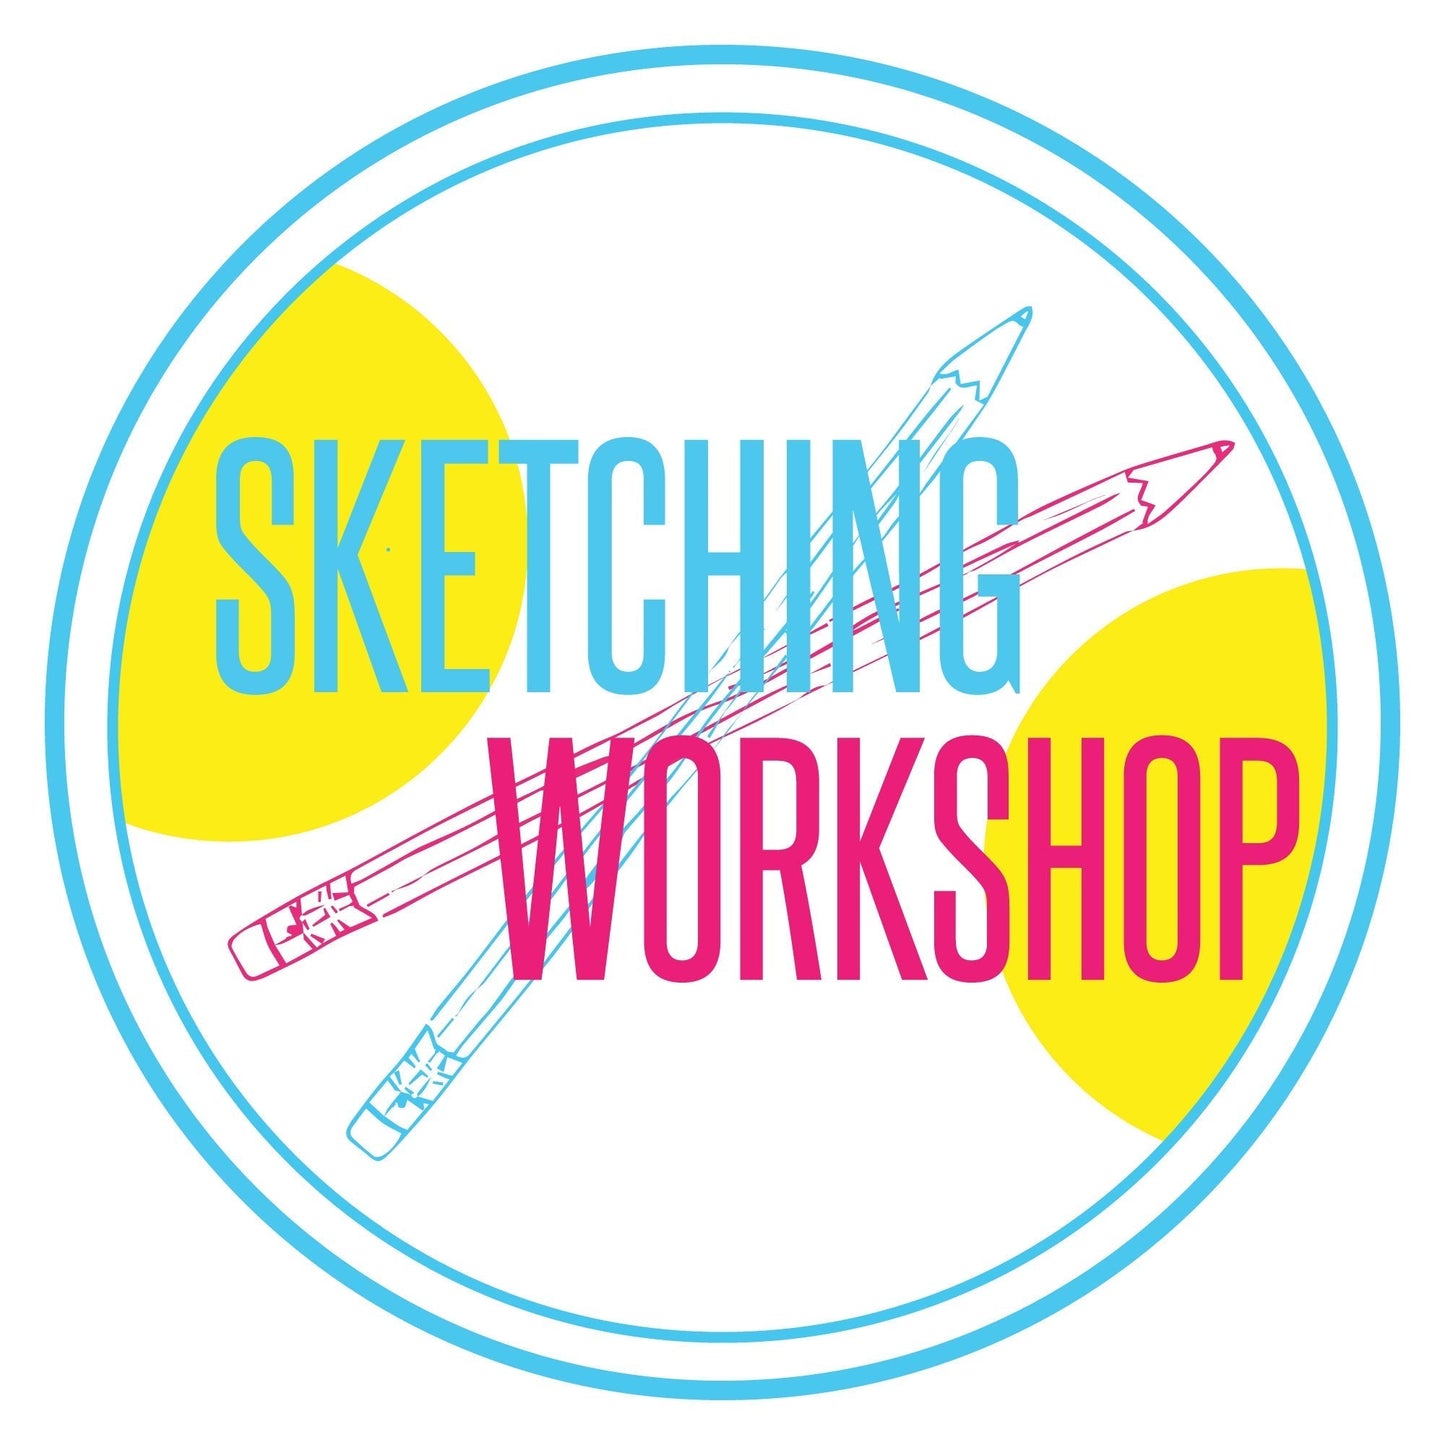 Sketching Workshop: I Heart Accessories - Saturday, May 4, 9am-11am